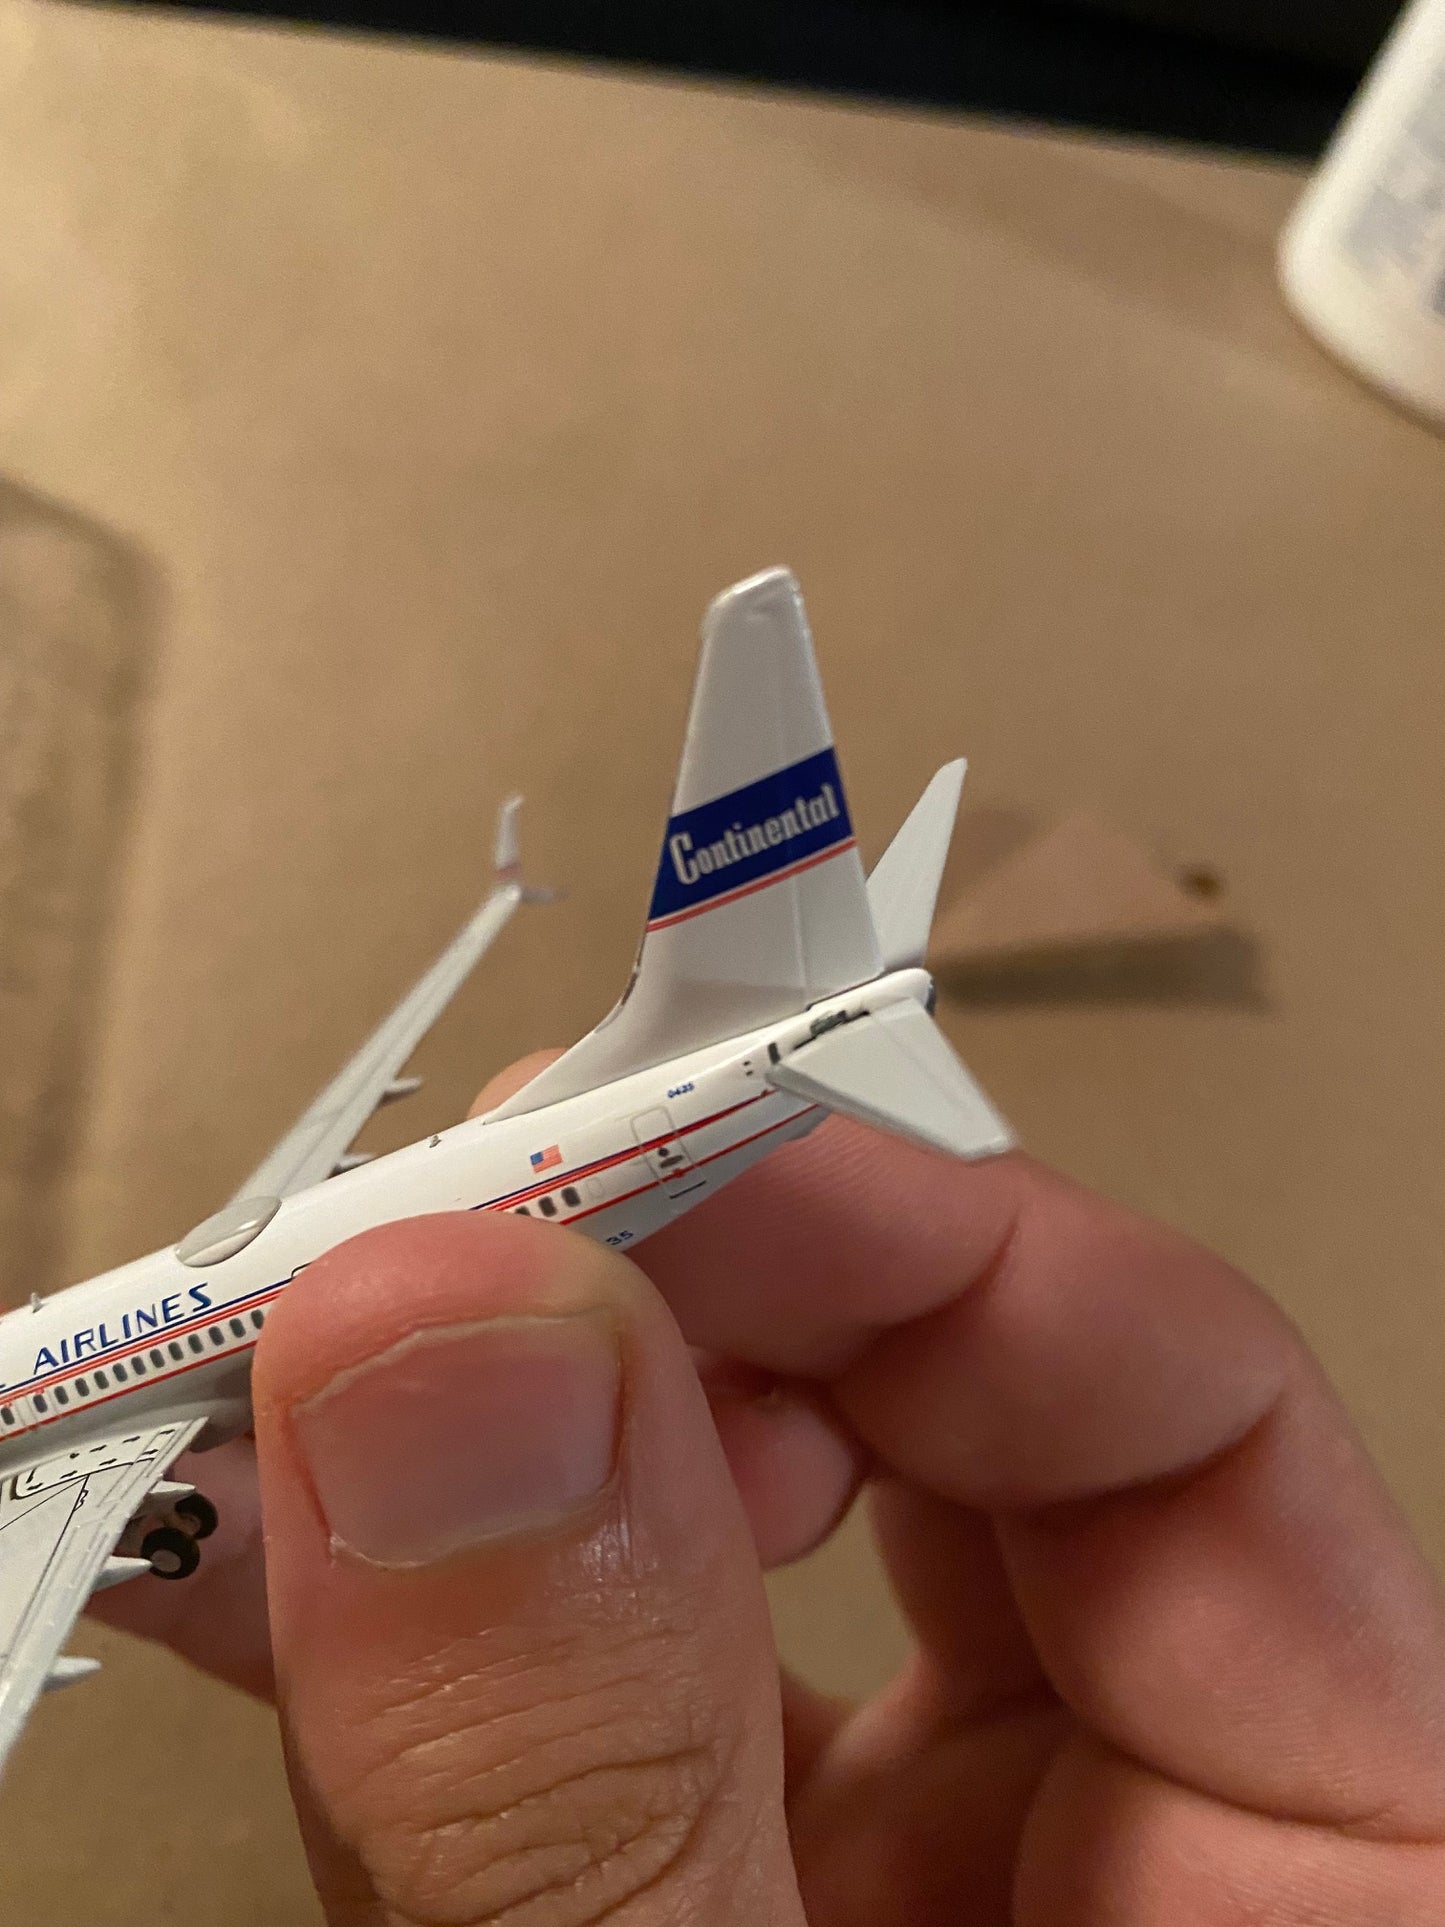 1/400 United Airlines B 737-900ER/w "Retro 75th Anniversary Livery" NG Models 79010 *Has paint chip by its horizontal stabilizer*